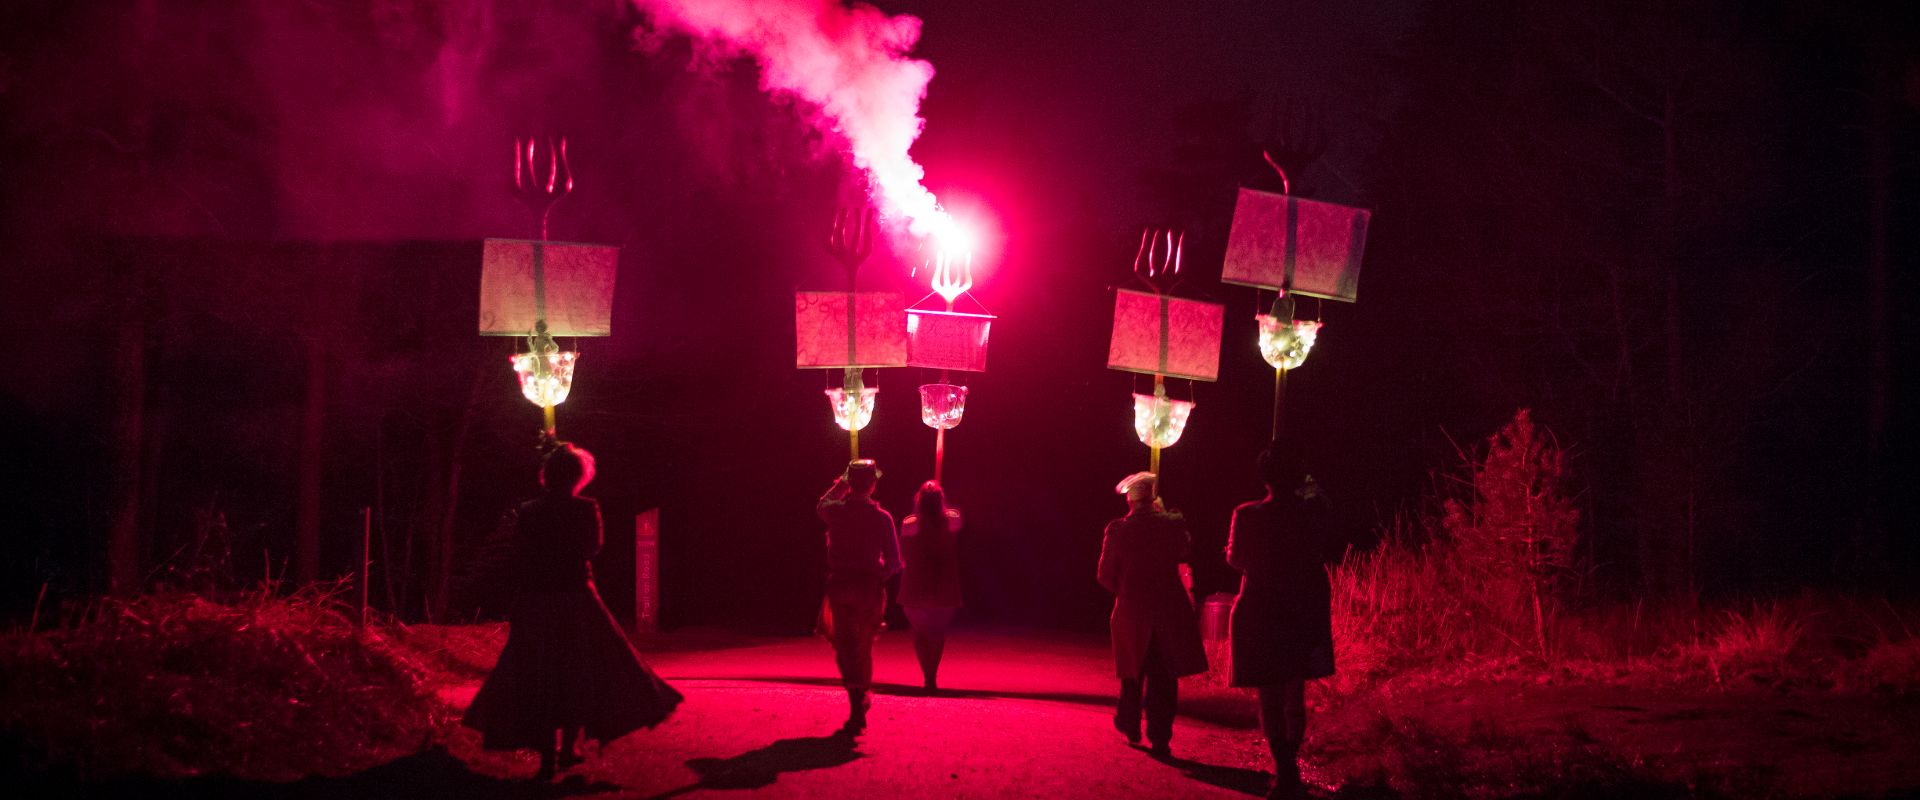 The Bonnet Maker, The Butcher, Isabelle, The Baker, and The Banker march off into the night. They hold their giant forks aloft, the way lit by a red flare.